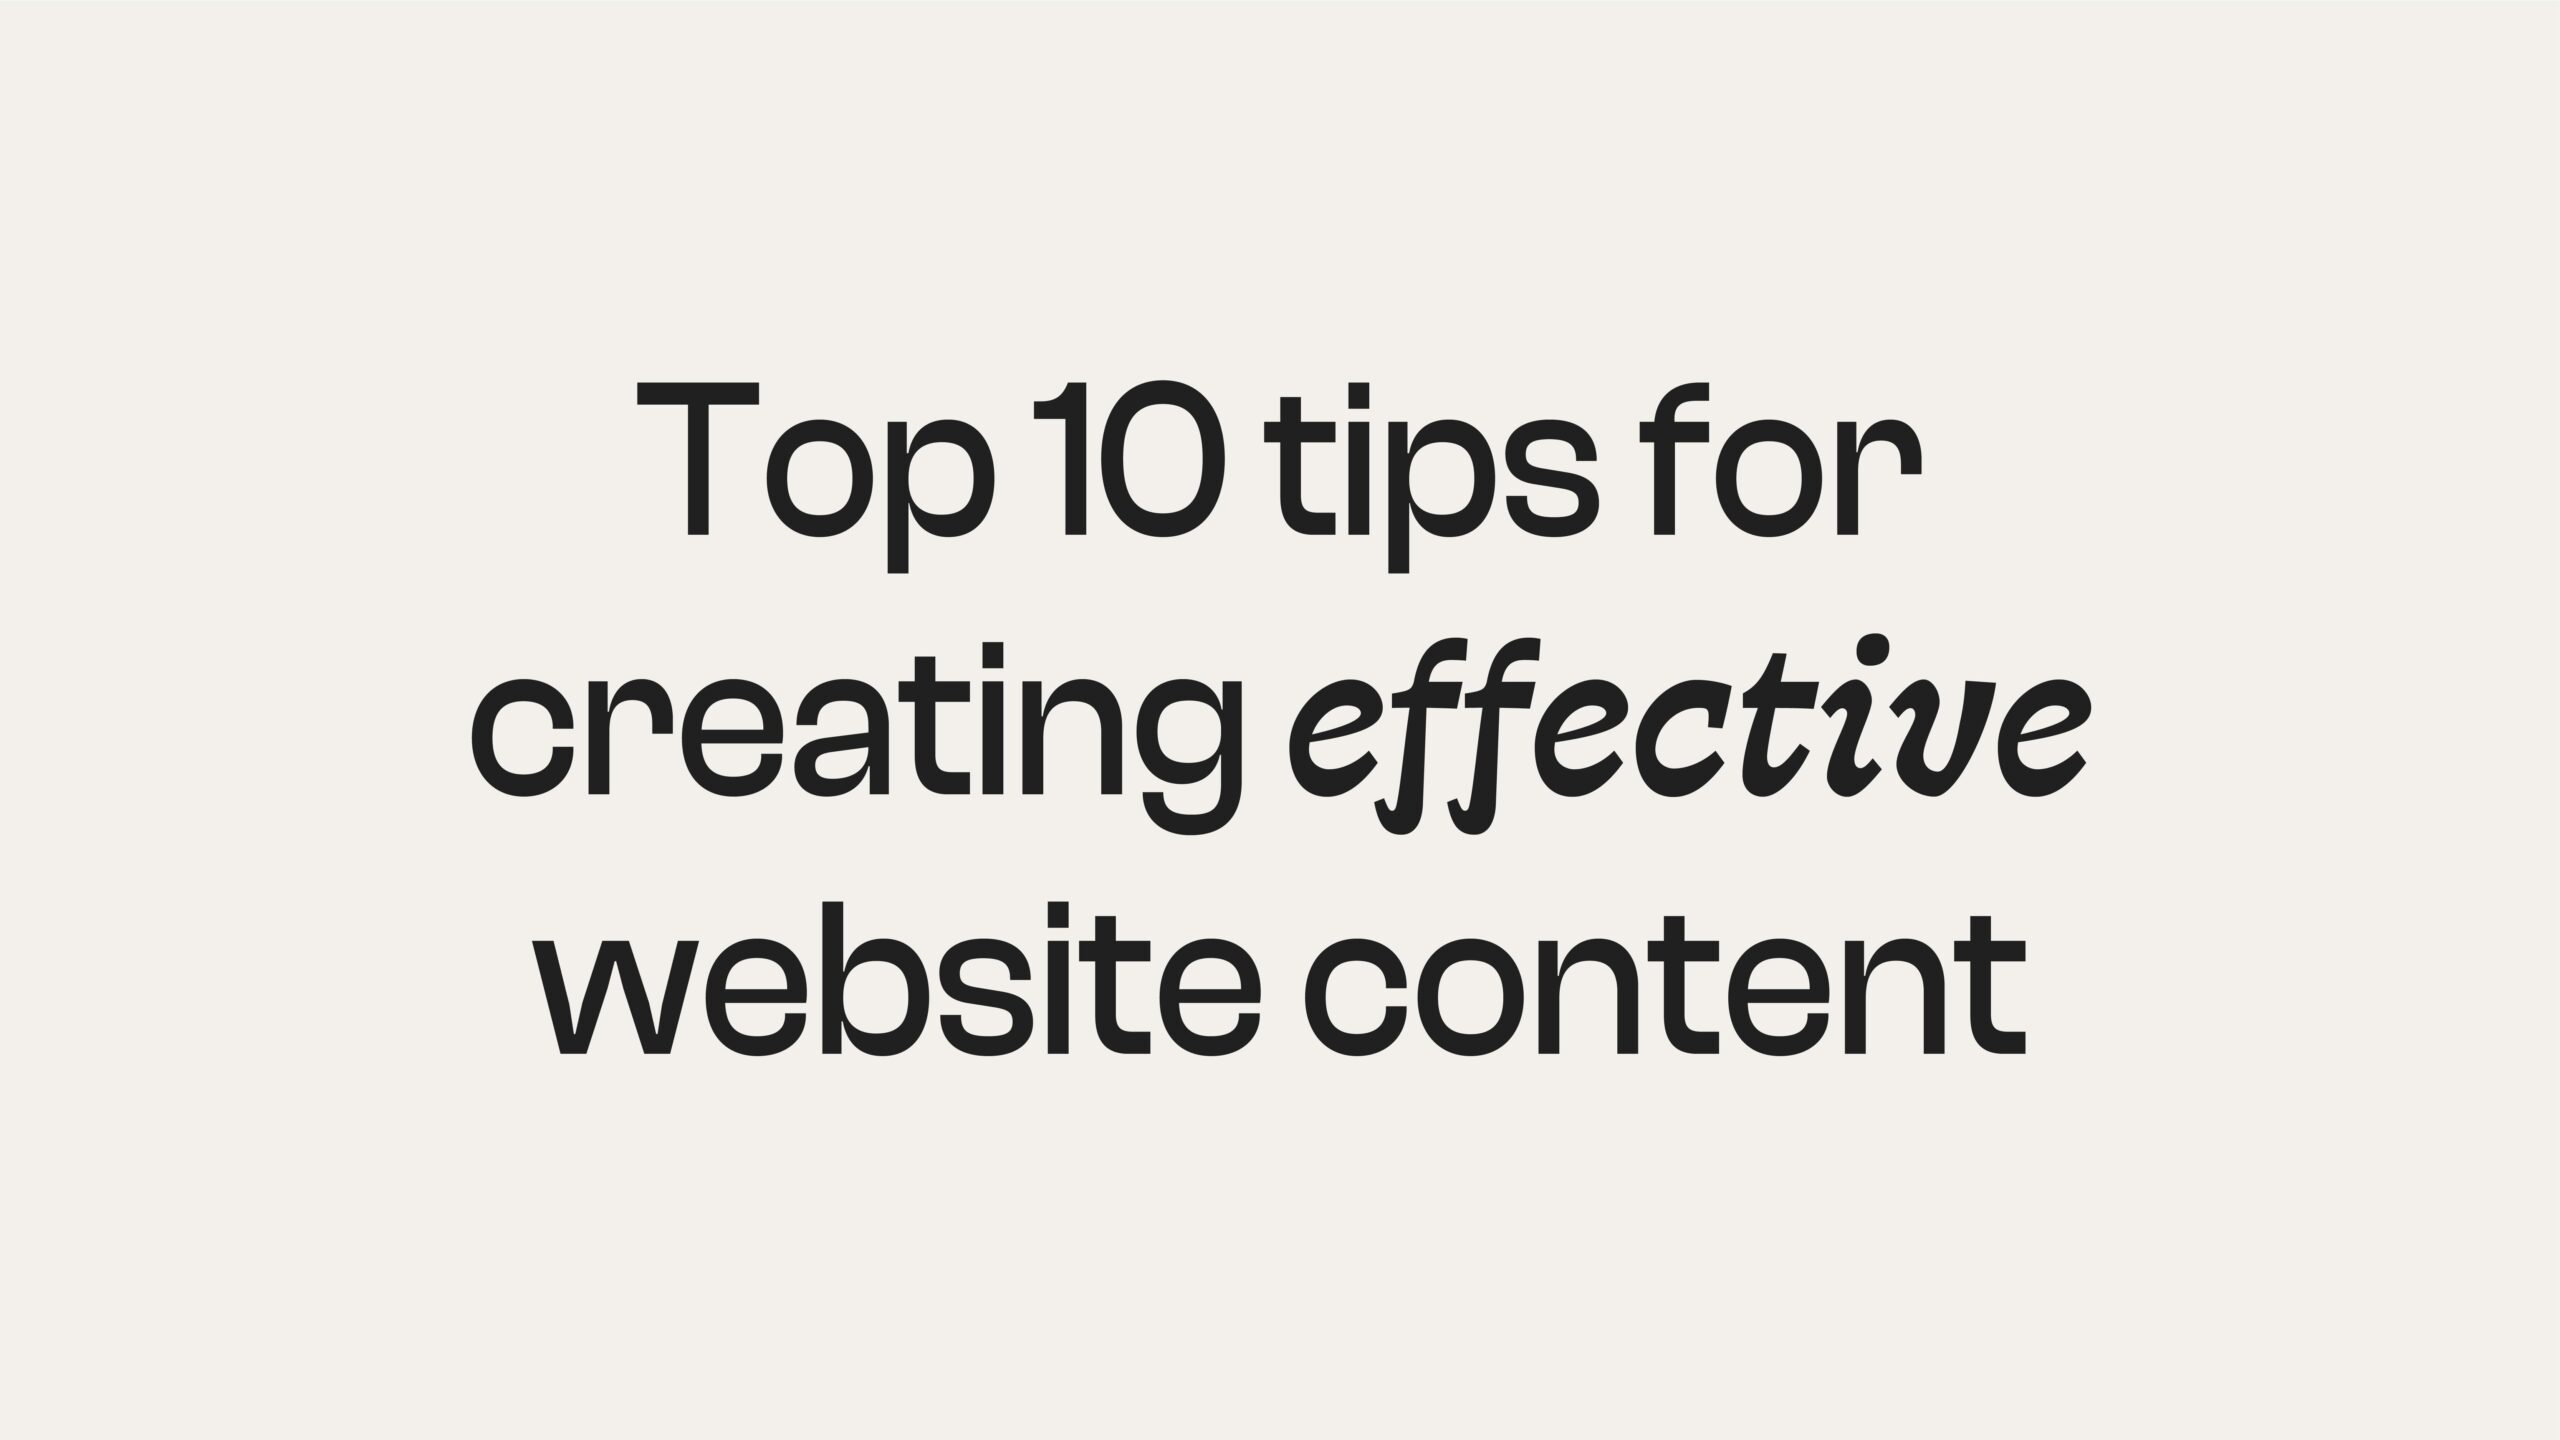 Top 10 tips for creating effective website content